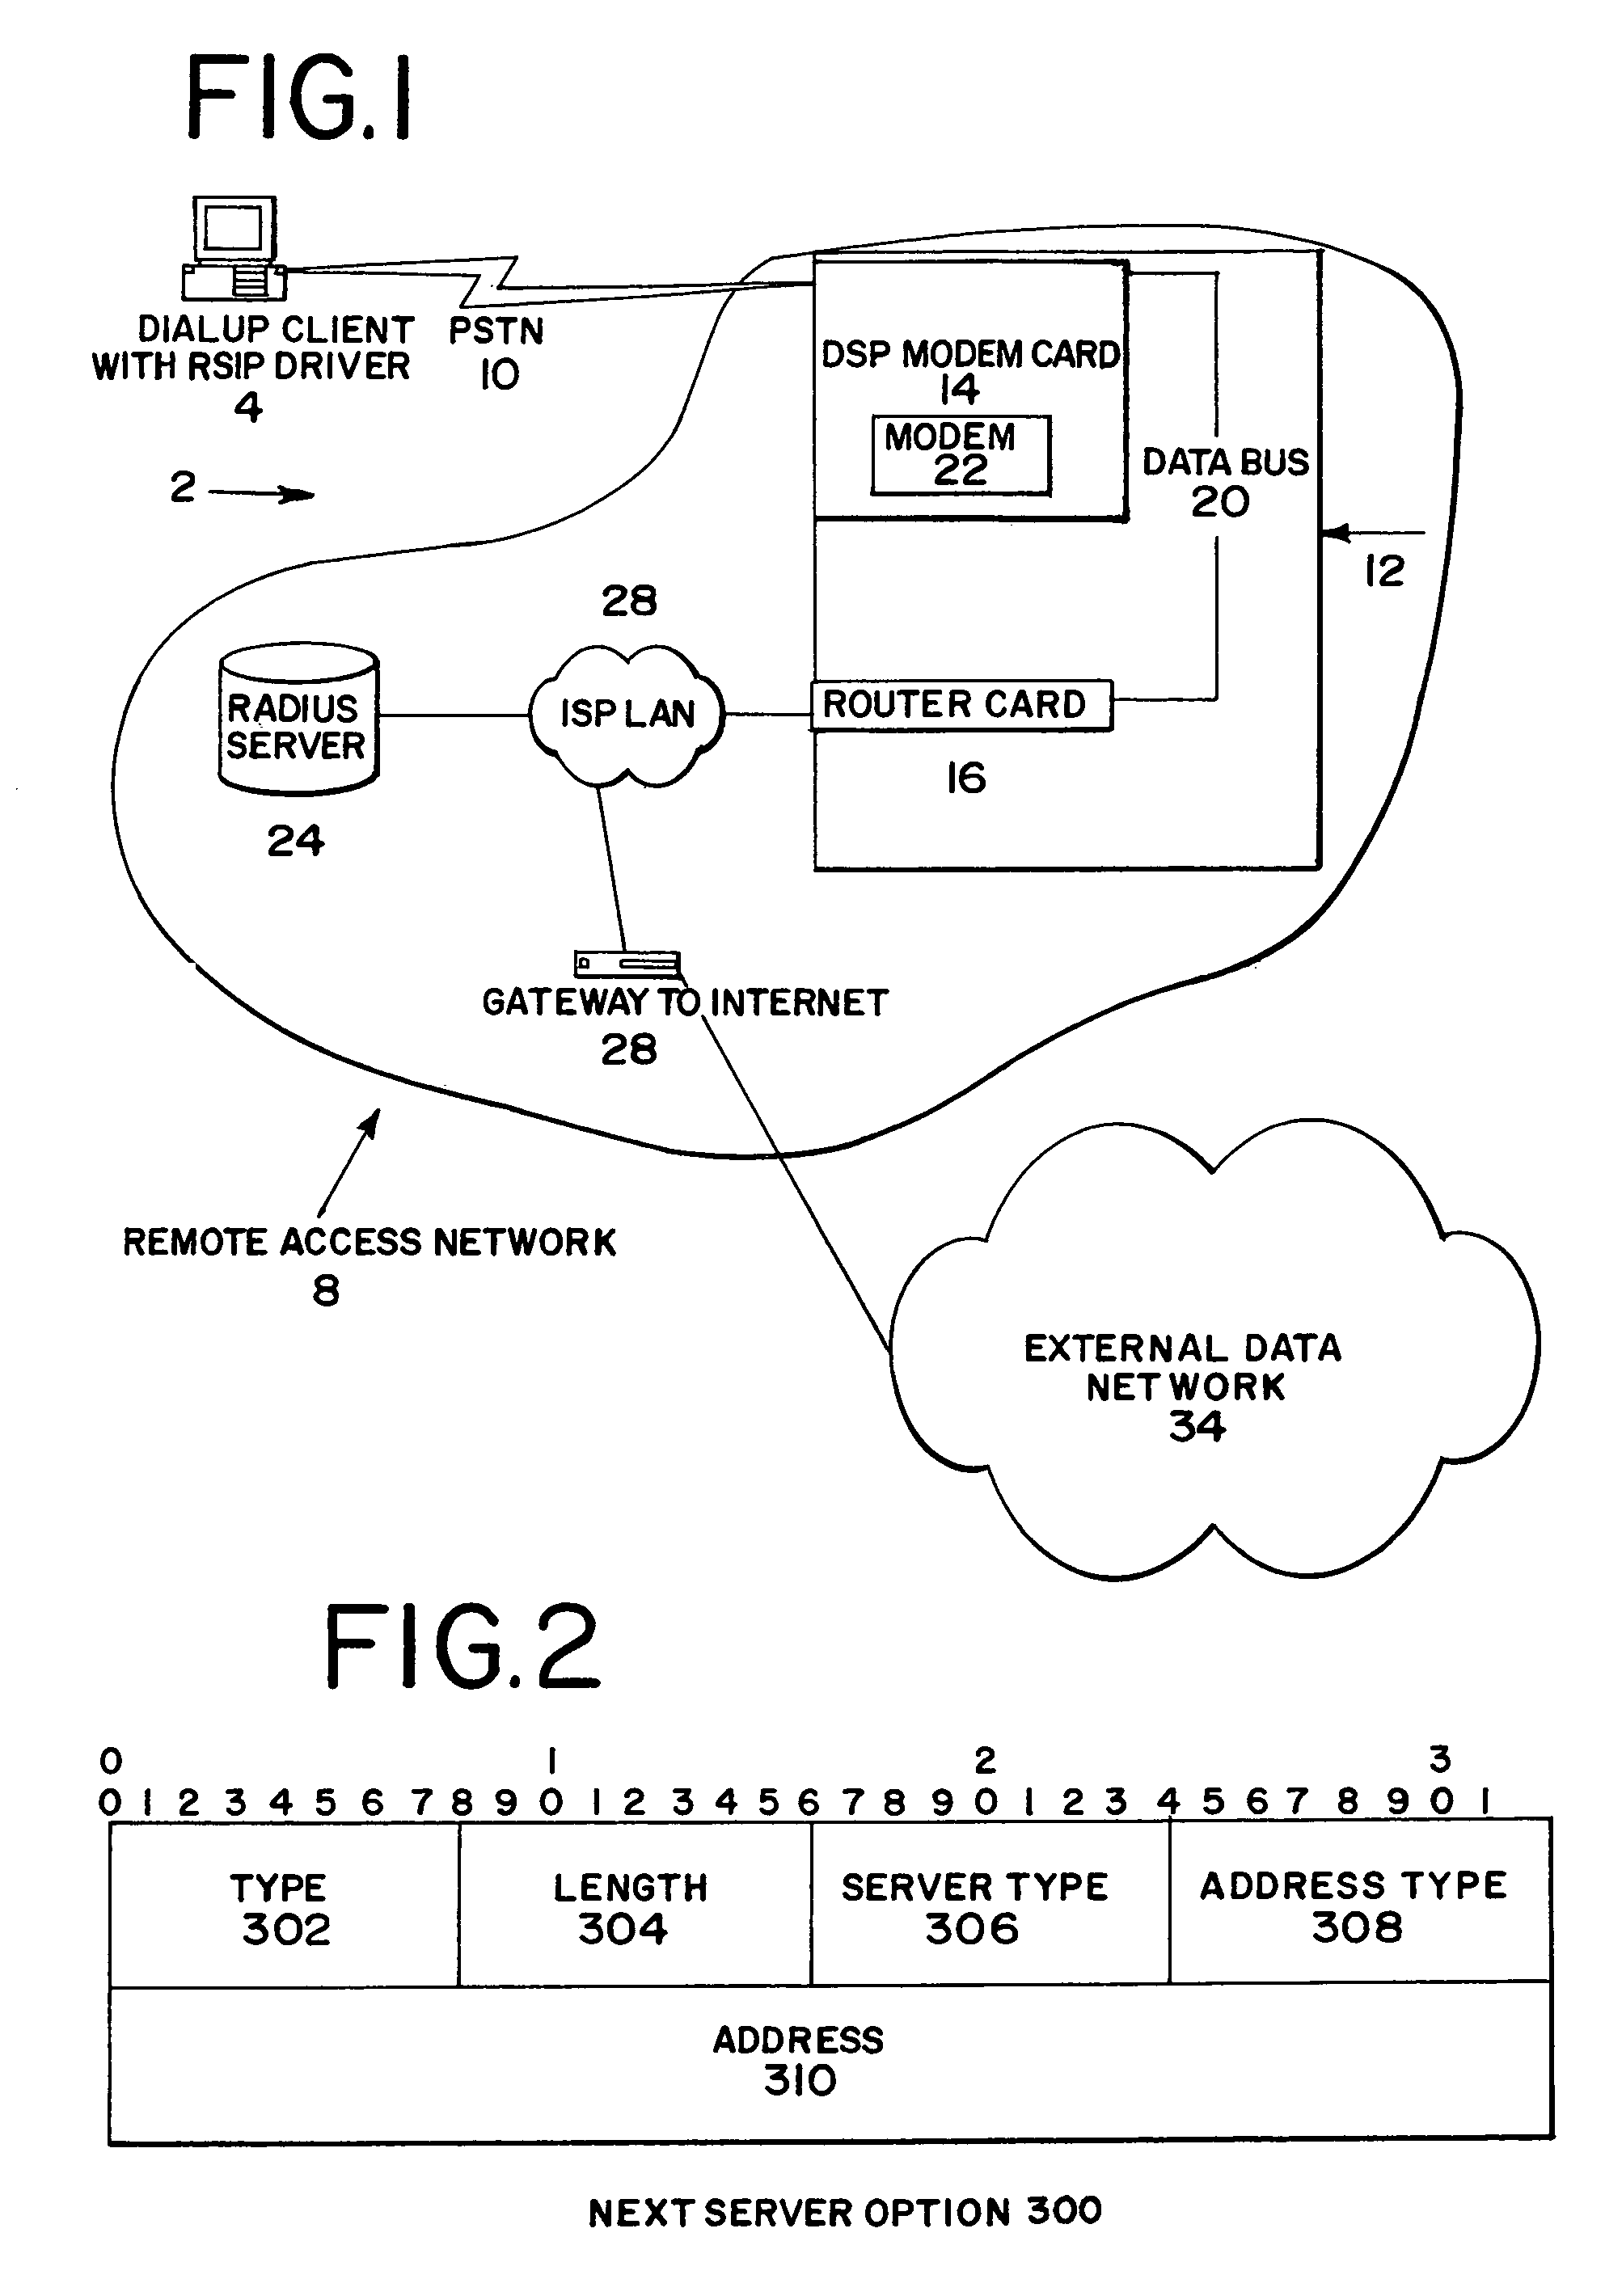 Method for supporting secondary address delivery on remote access servers